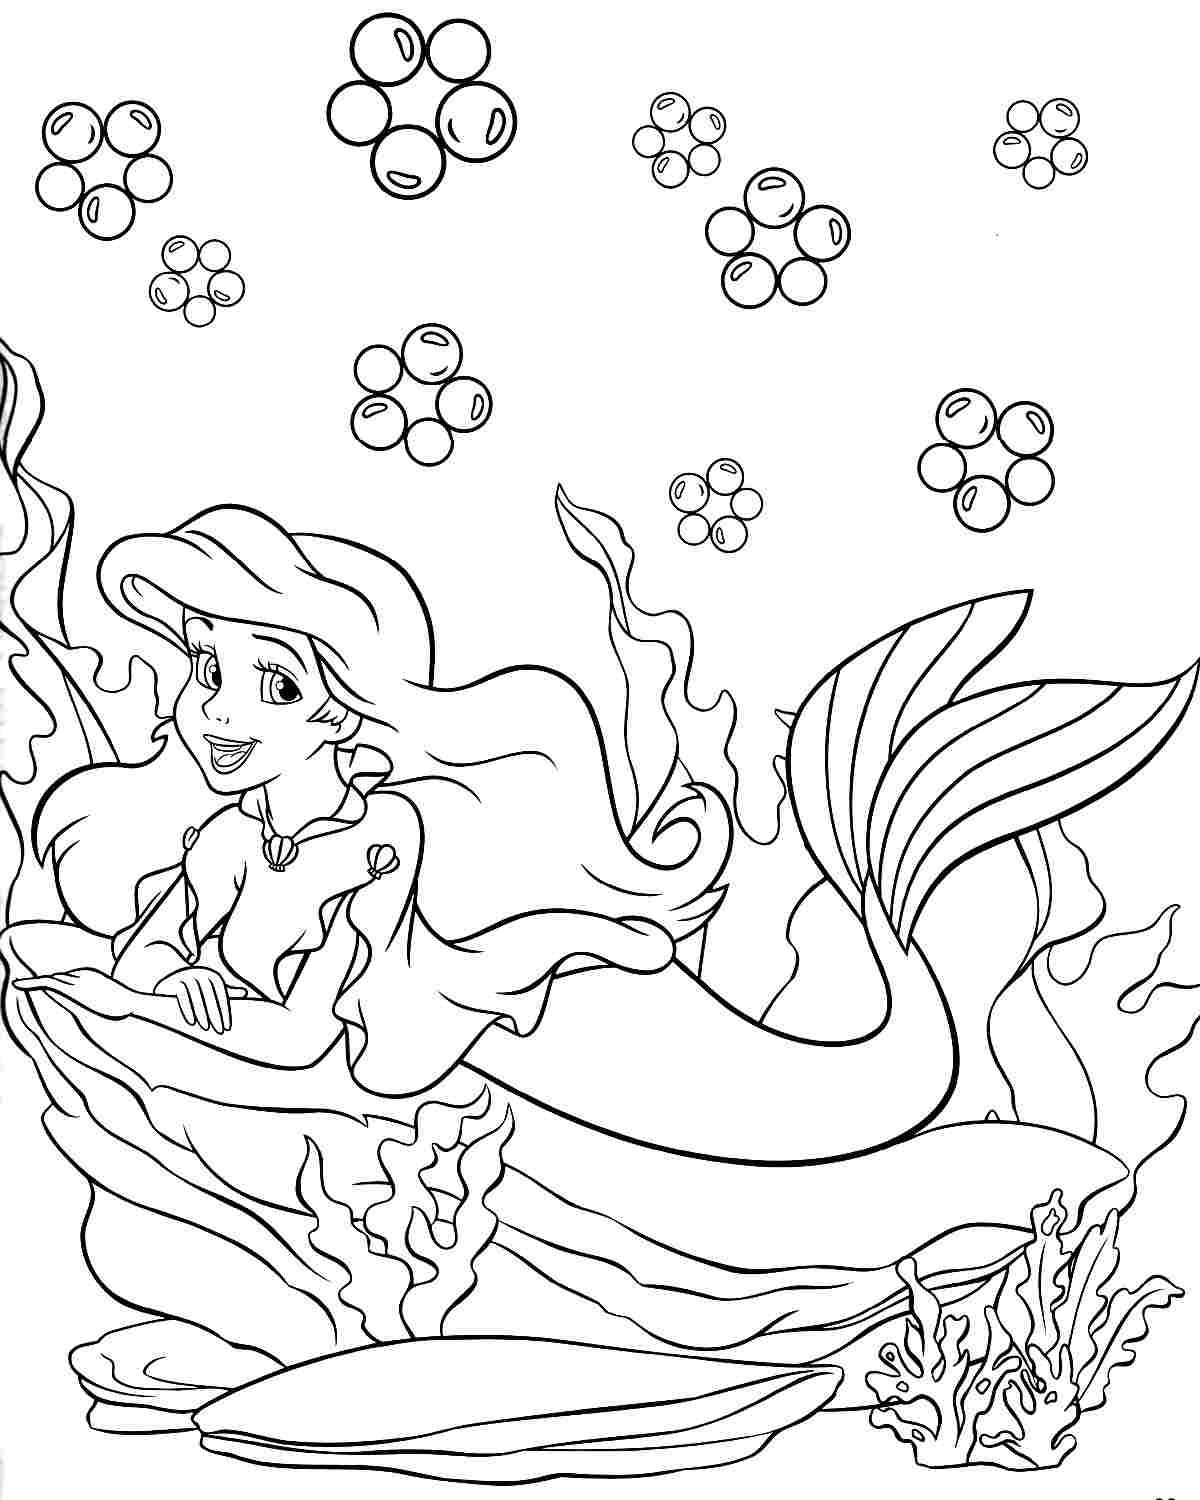 Disney Princess Ariel Coloring Pages 84 with Disney Princess Ariel Coloring Pages